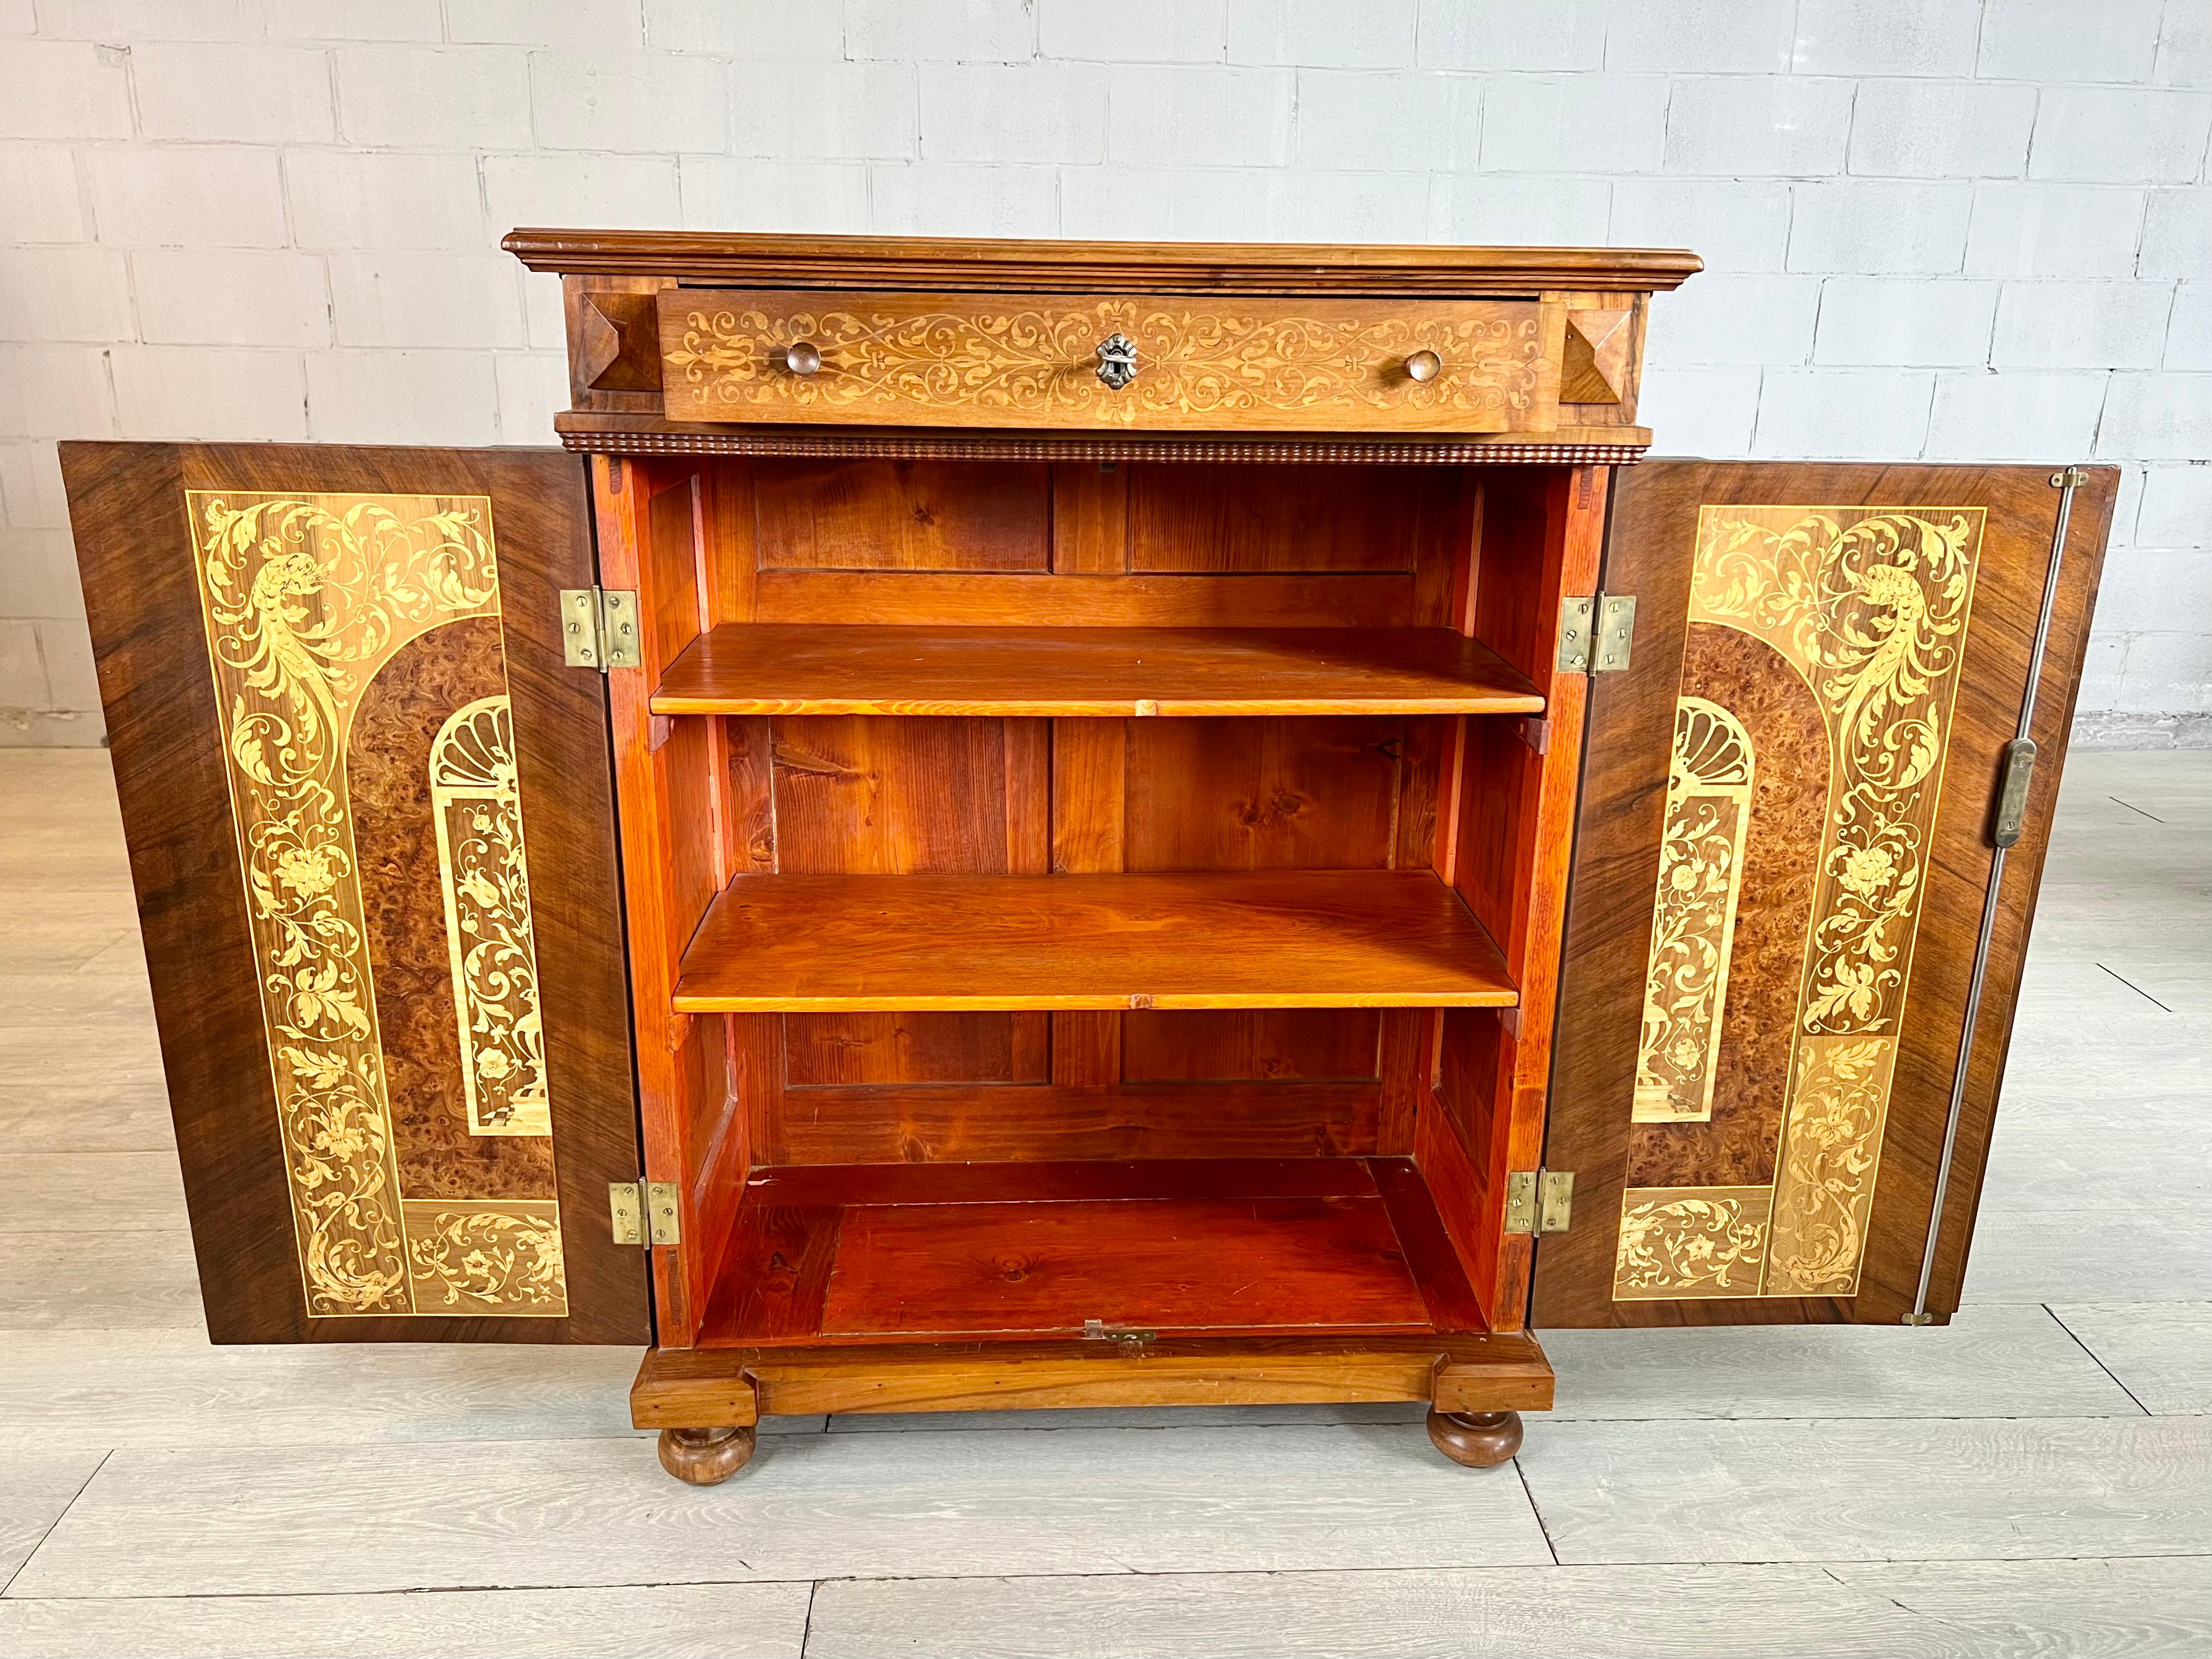 20th Century Antique Victorian Inlaid Fruitwood Storage Cabinet Sideboard For Sale